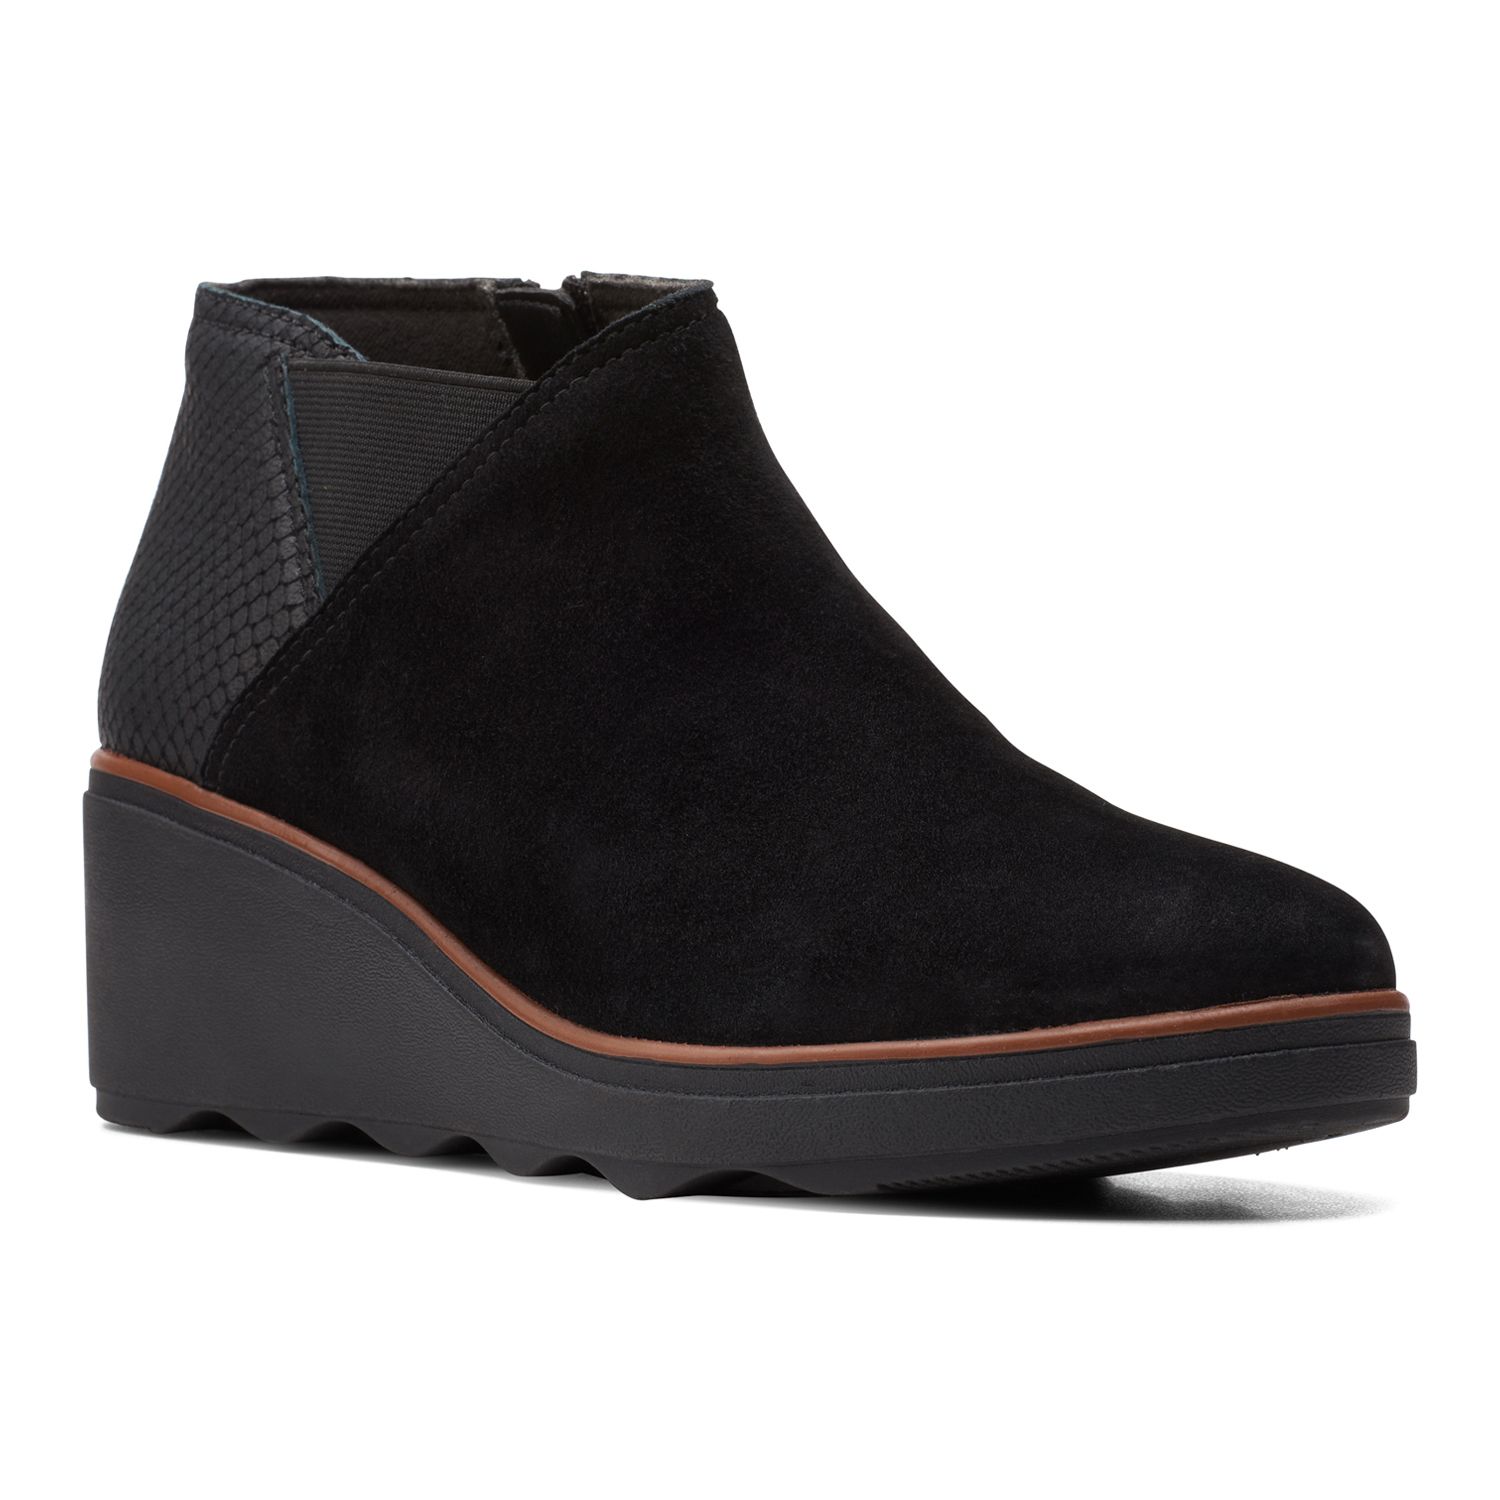 Mazy Harwich Women's Wedge Ankle Boots